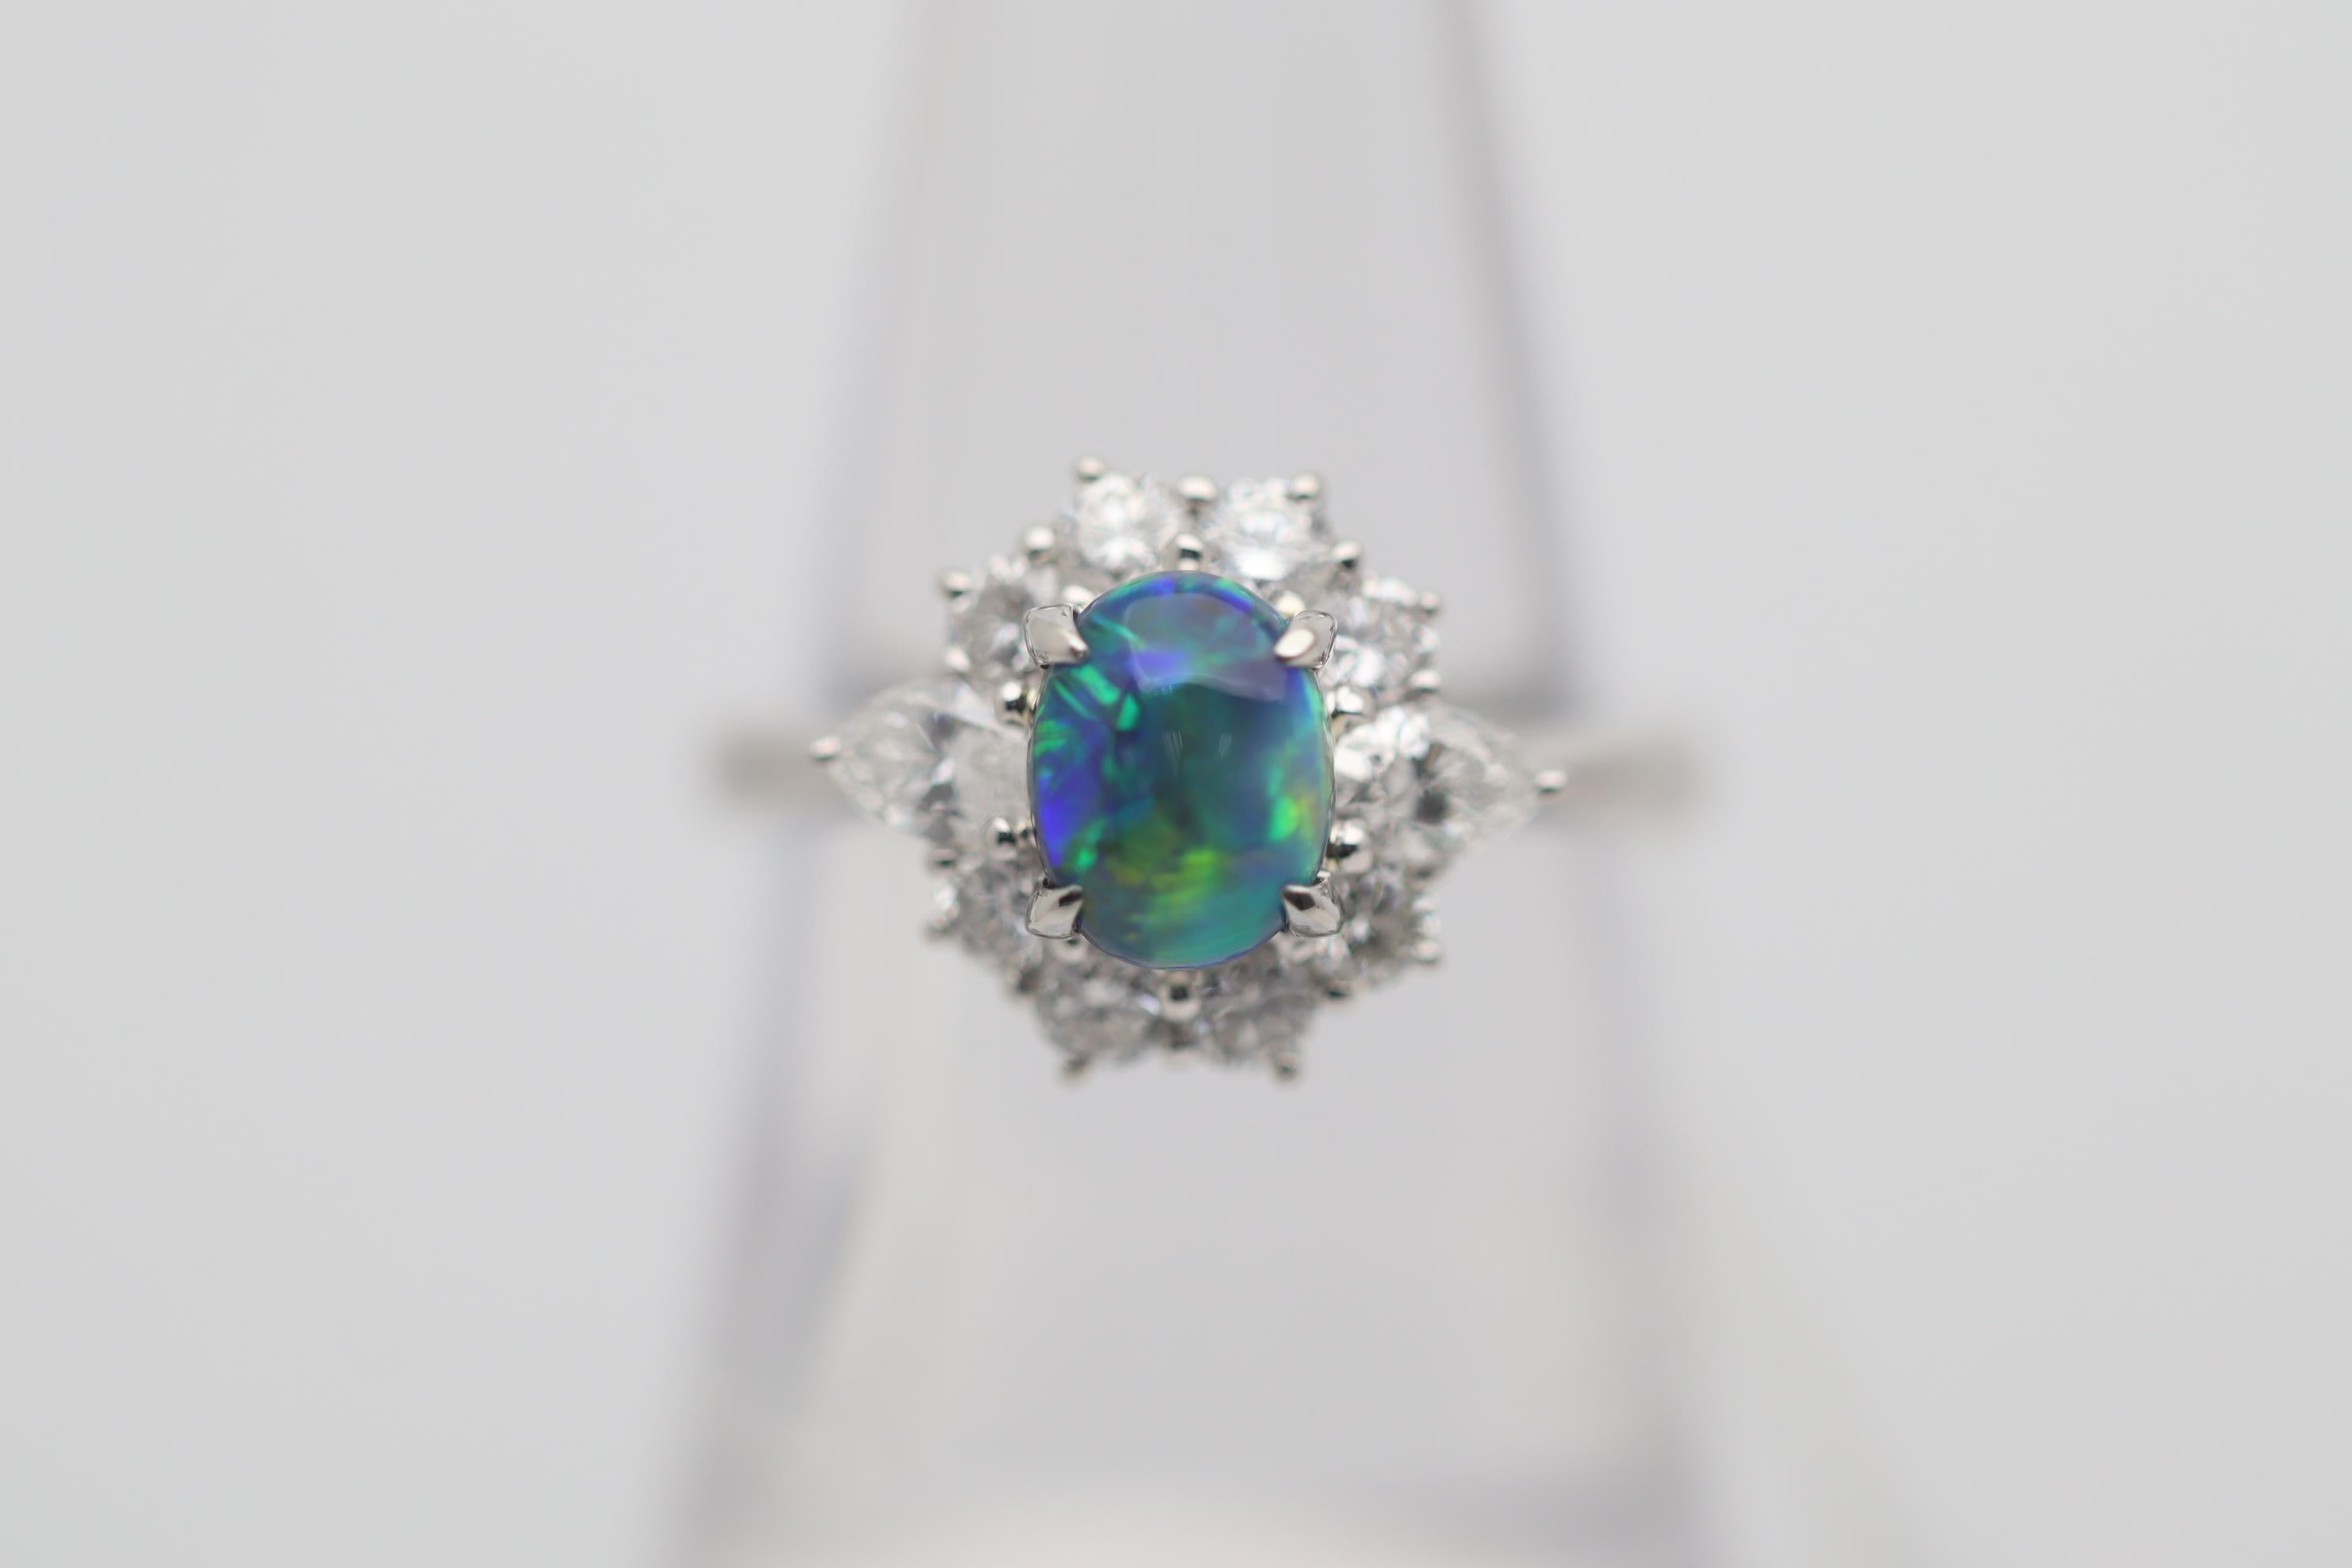 What it lacks in size it makes up in quality and beautiful color! This gem black opal weighs a respectable 1.11 carats and has stunning play-of-color. Bright and intense flashes of primarily green and blue, as well as orange and yellow roll across